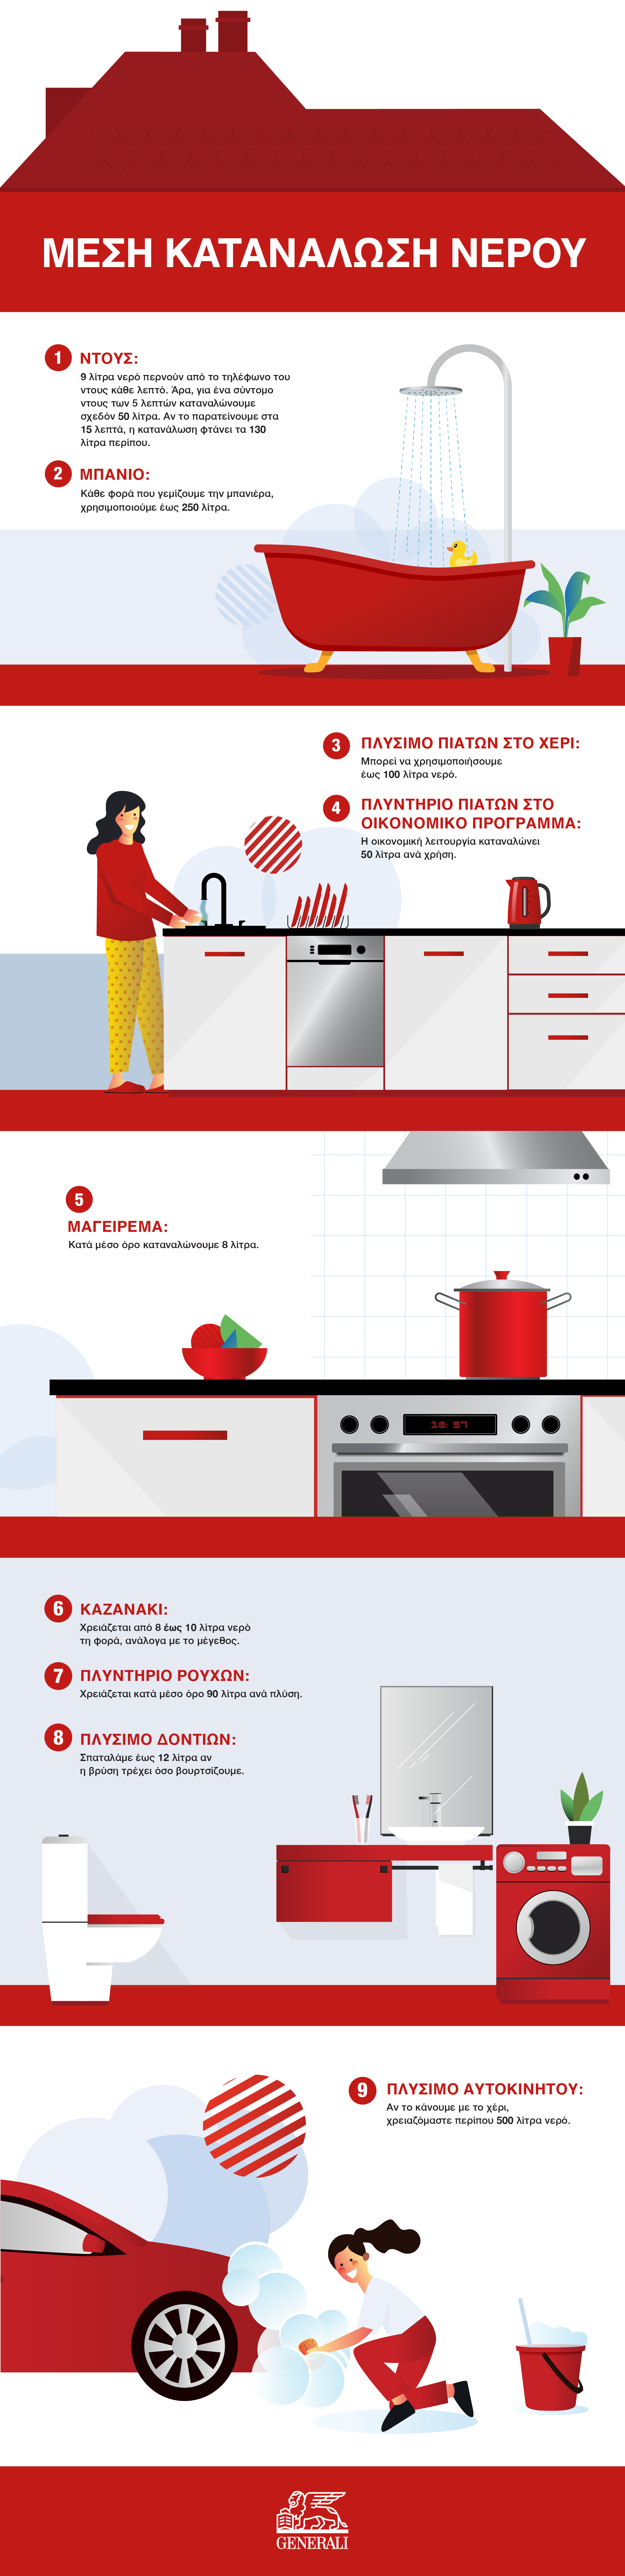 Generali_How to save water at home_Infographic_Argentina_11.05.21.jpg